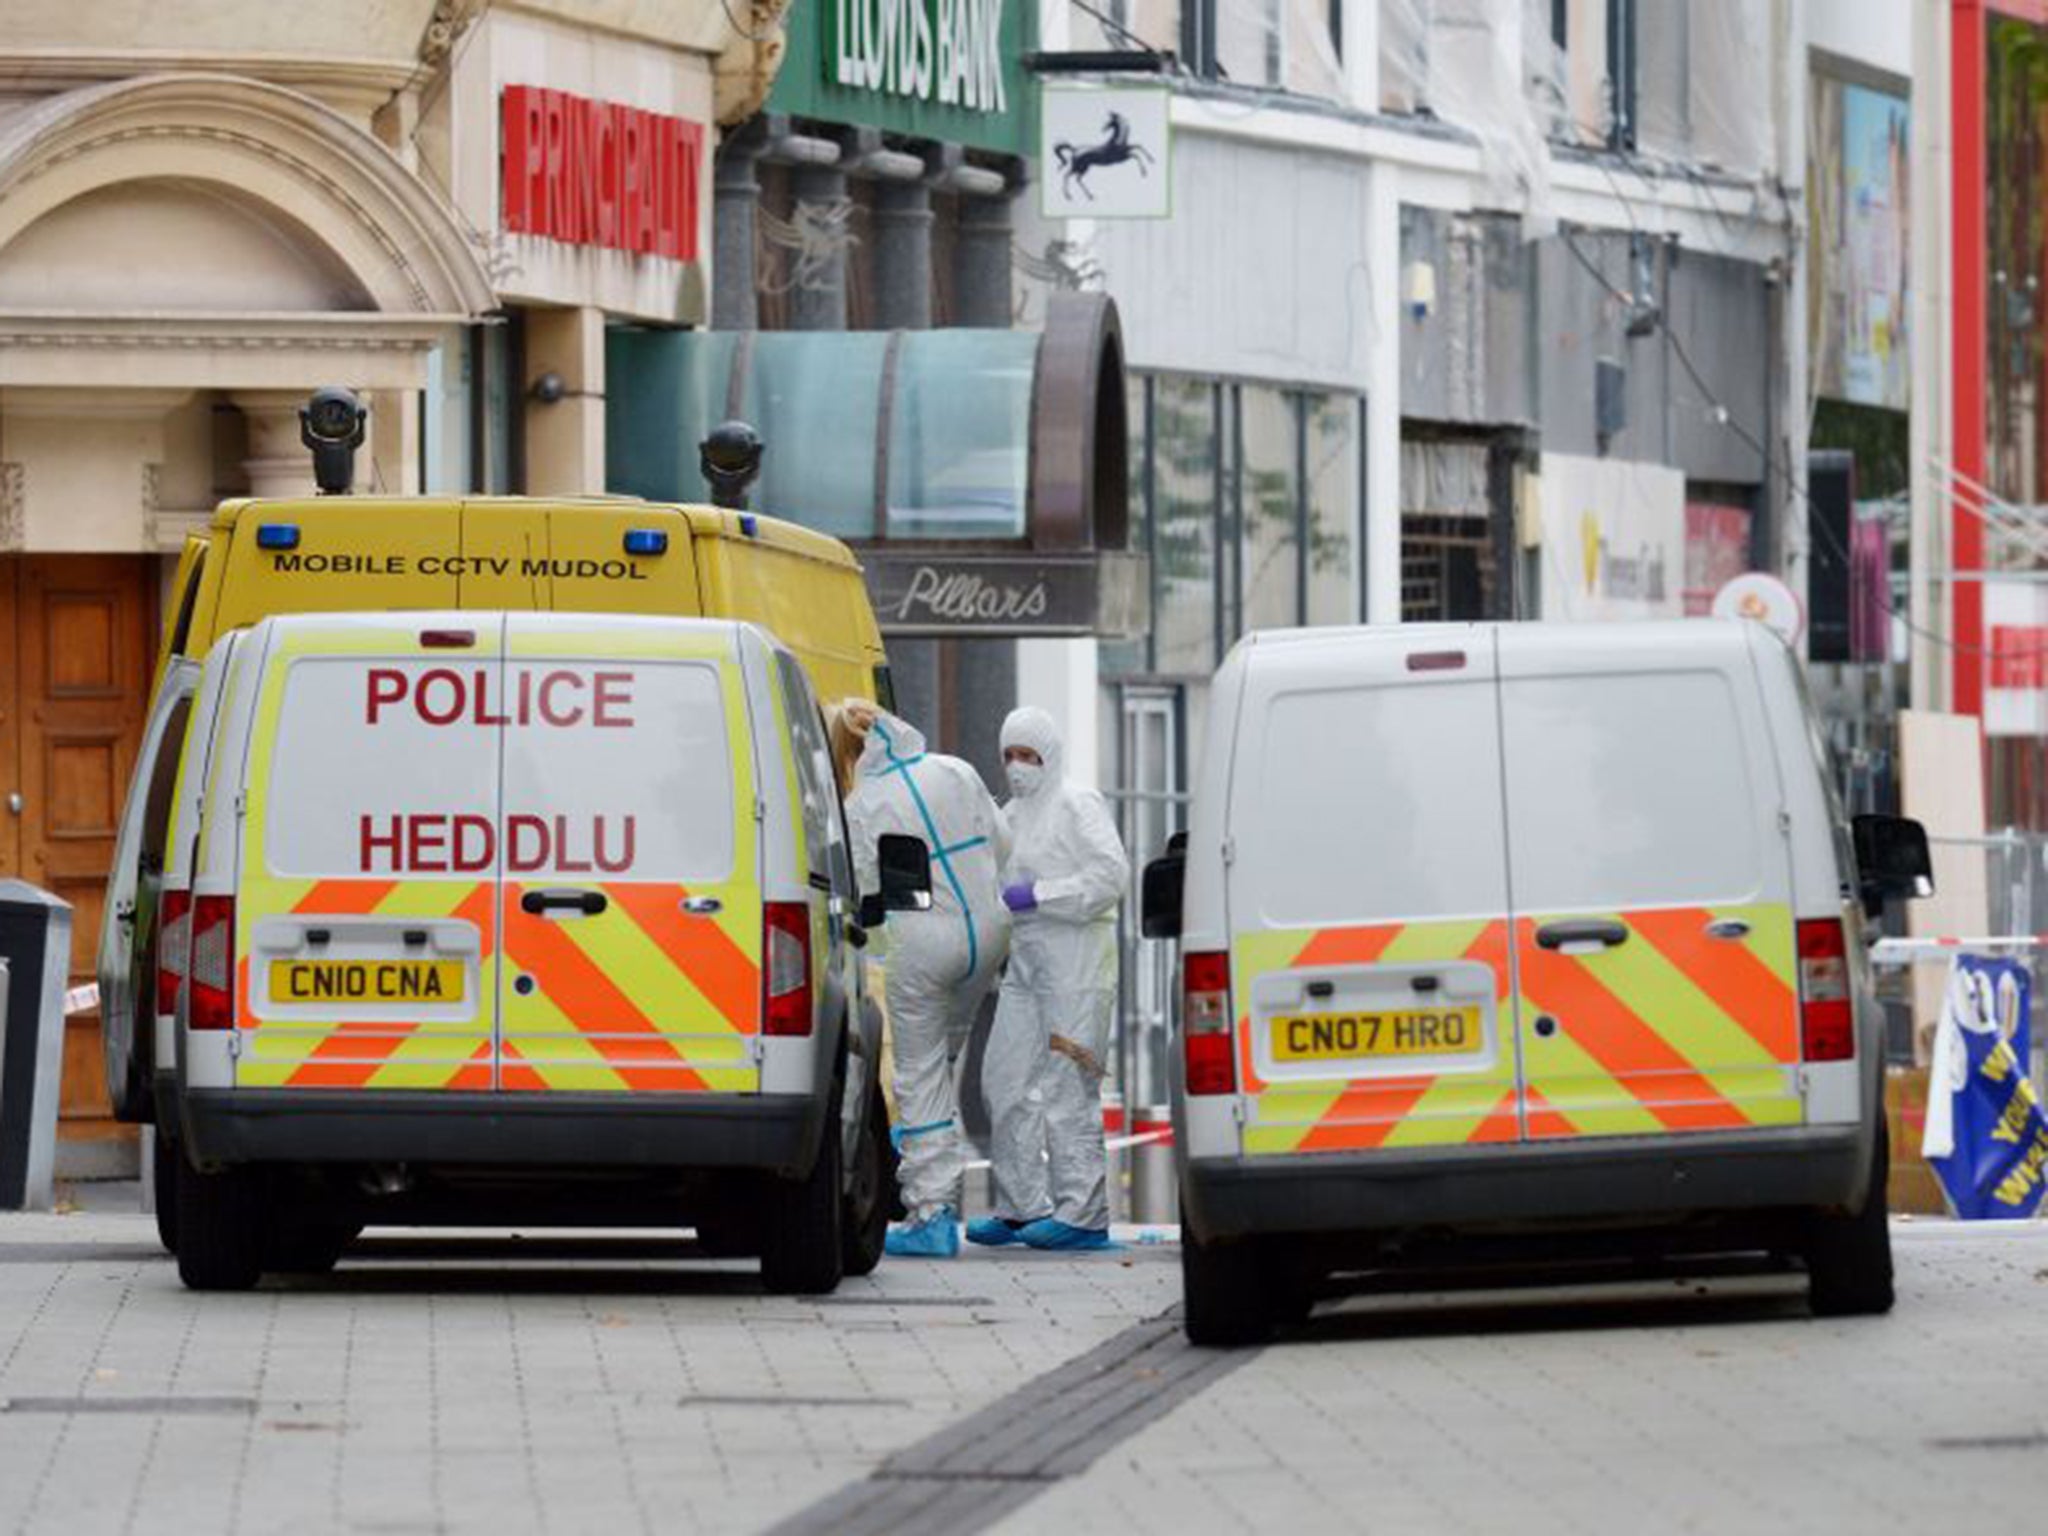 Forensic officers at the scene in Queen Street, near Cardiff Castle after the bodies of a man and a woman were found in Cardiff city centre